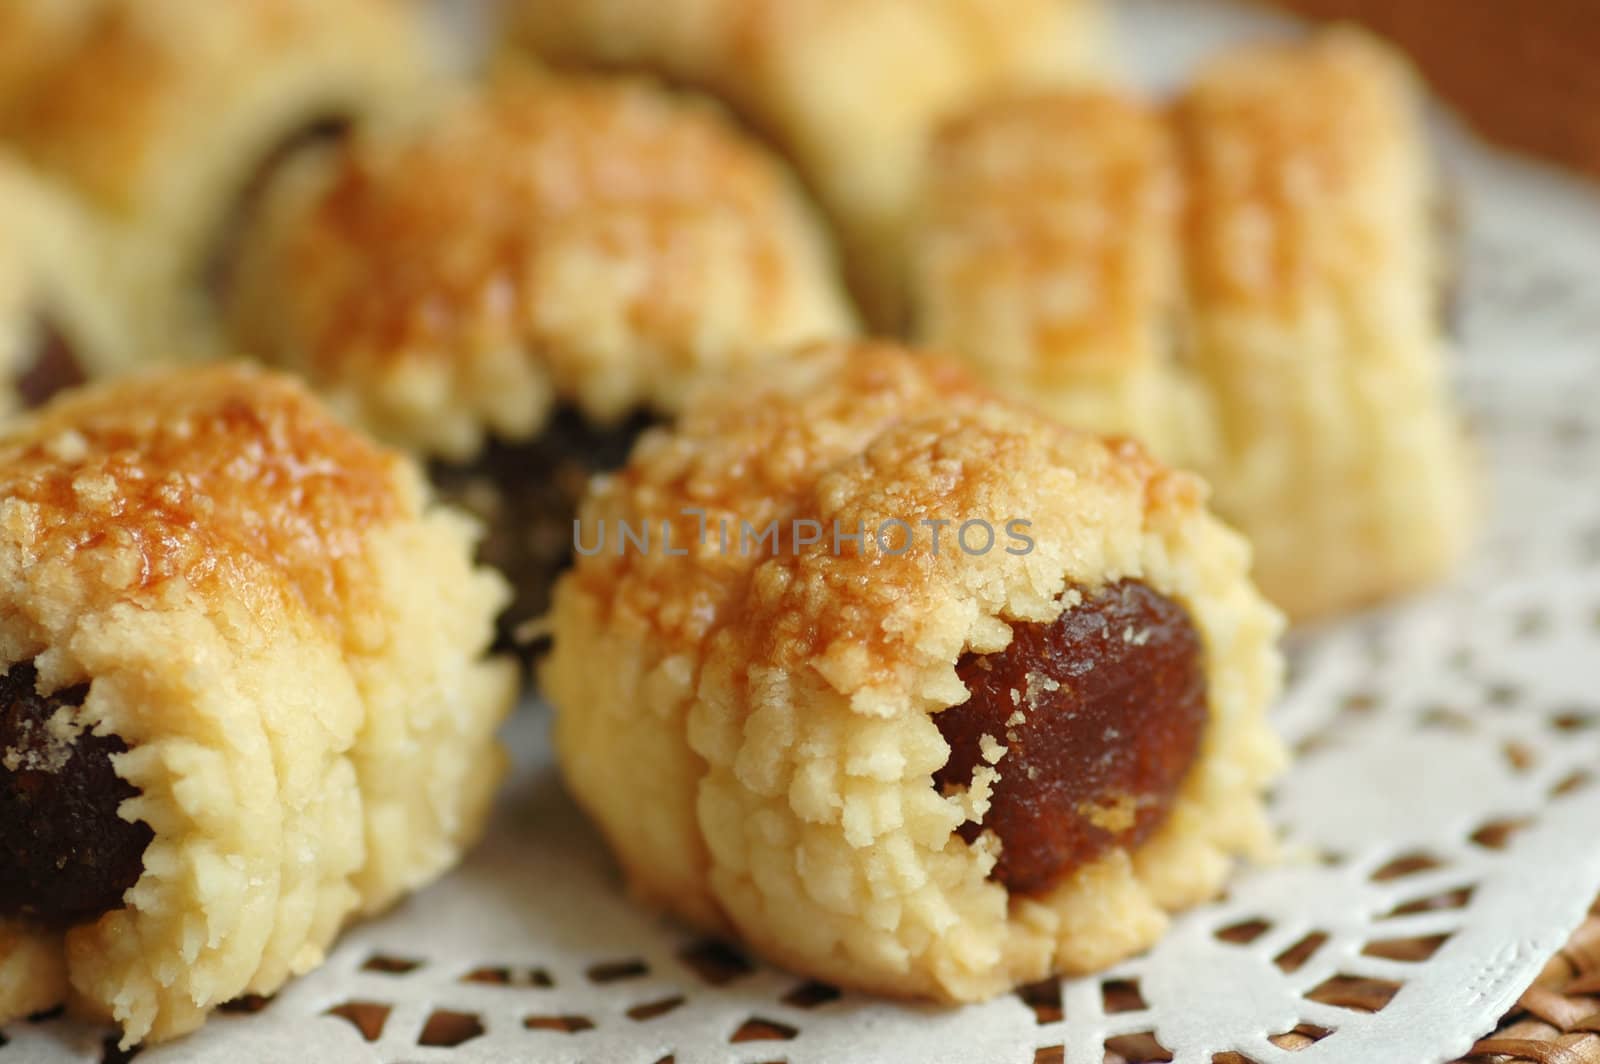 Freshly baked pineapple tarts with shallow depth of field